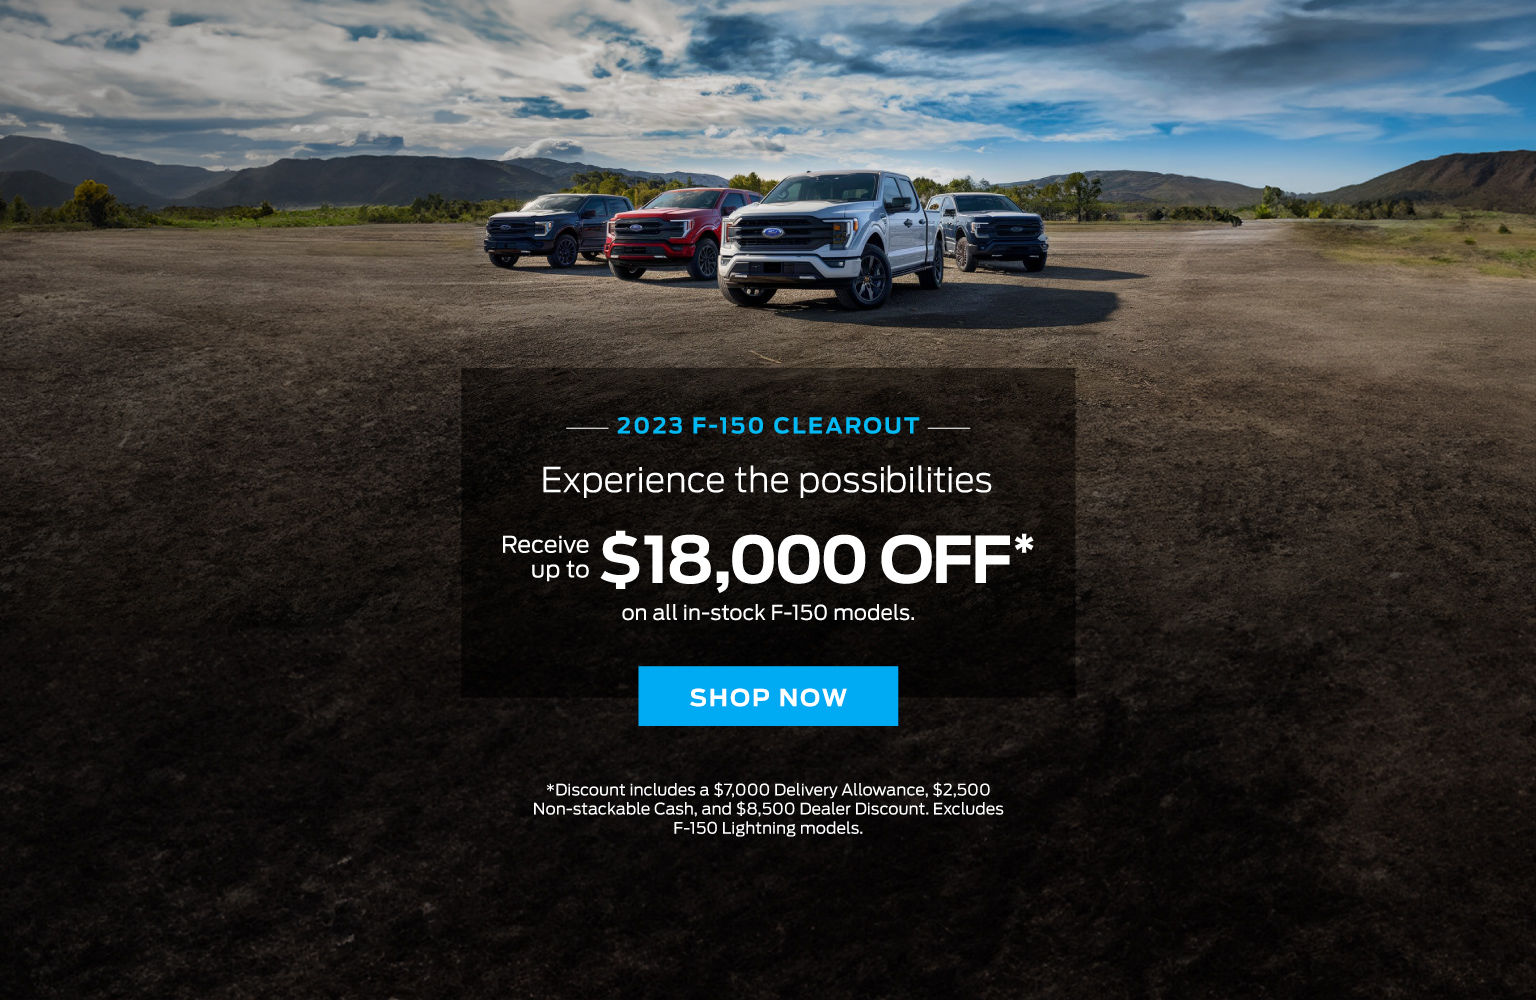 2023 F-150 Lease Offer